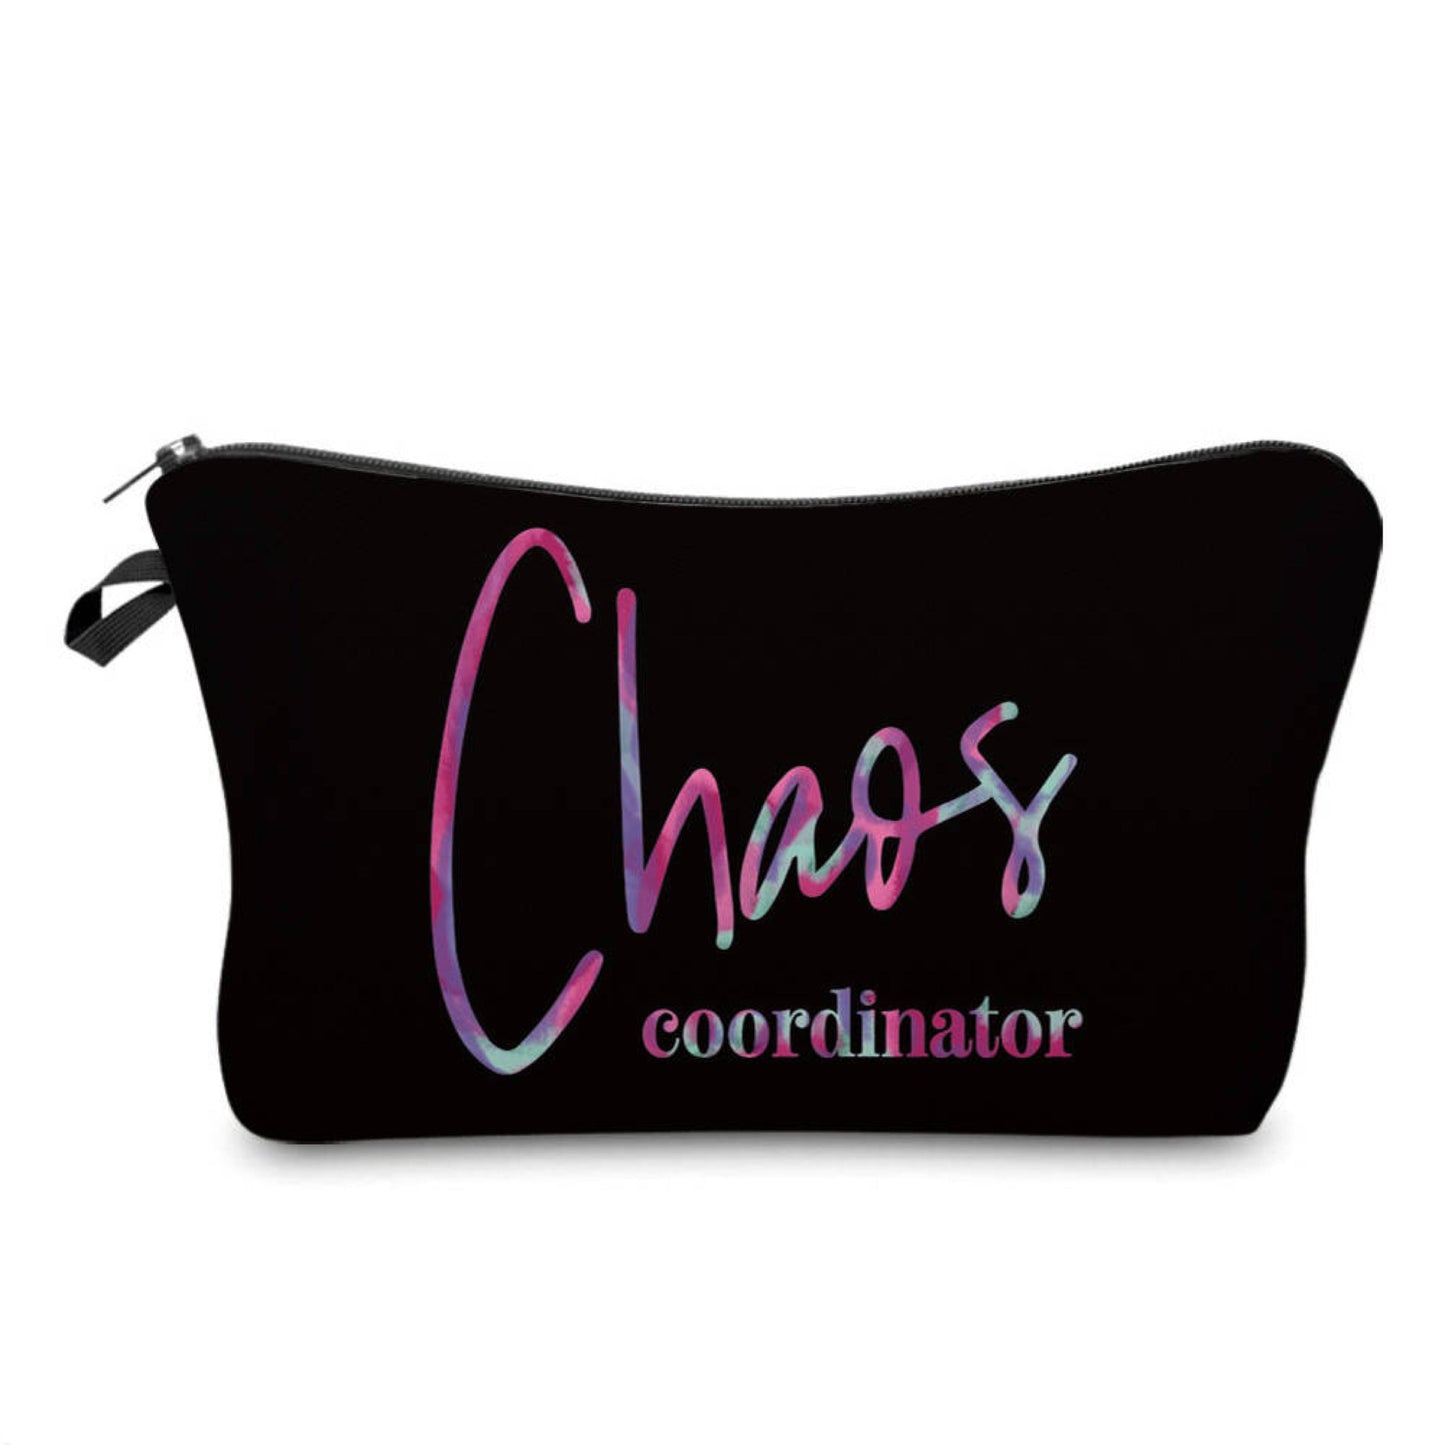 Pouch - Chaos Coordinator